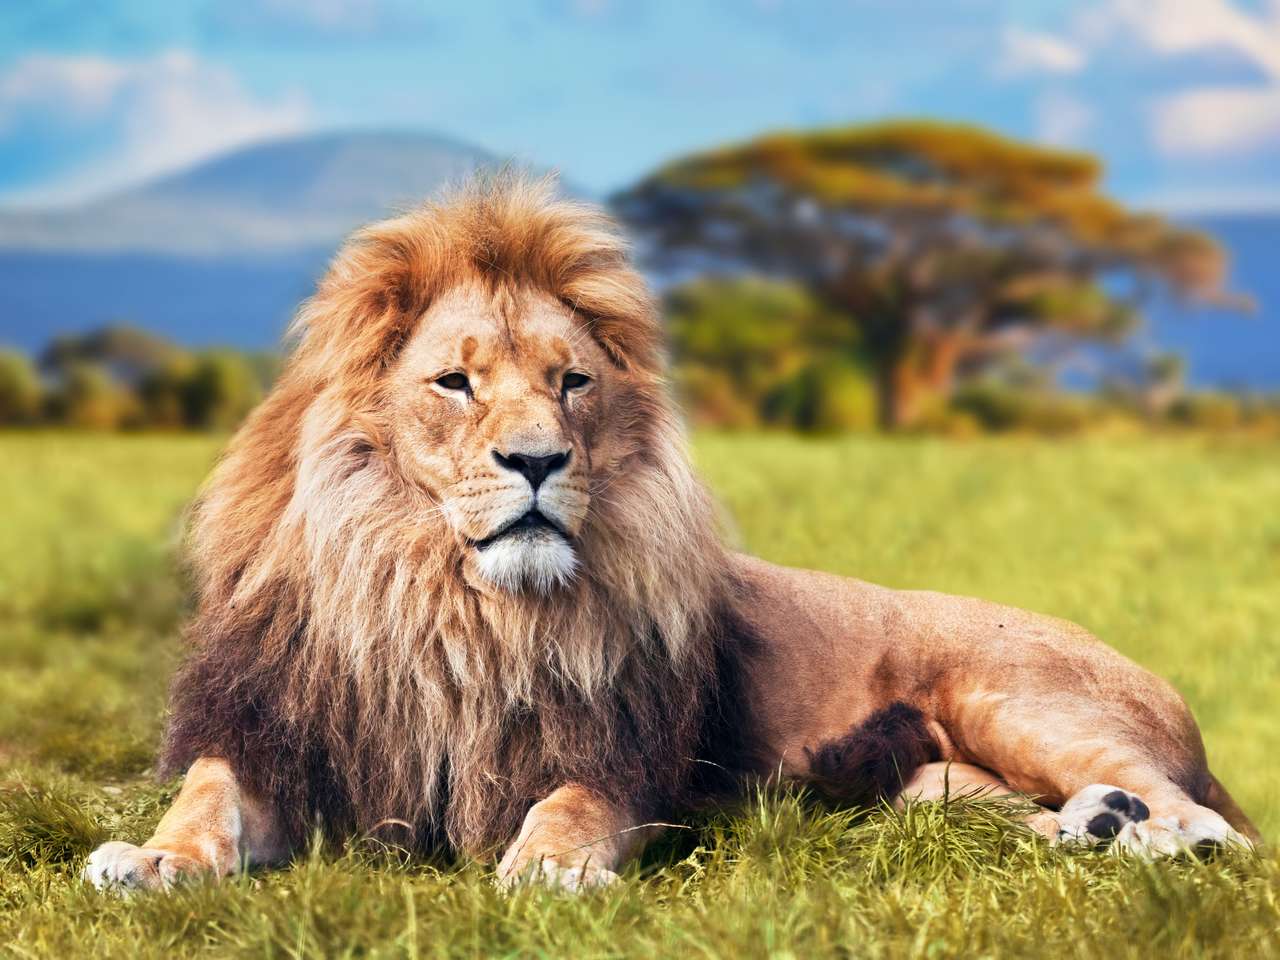 Big lion lying on grass online puzzle